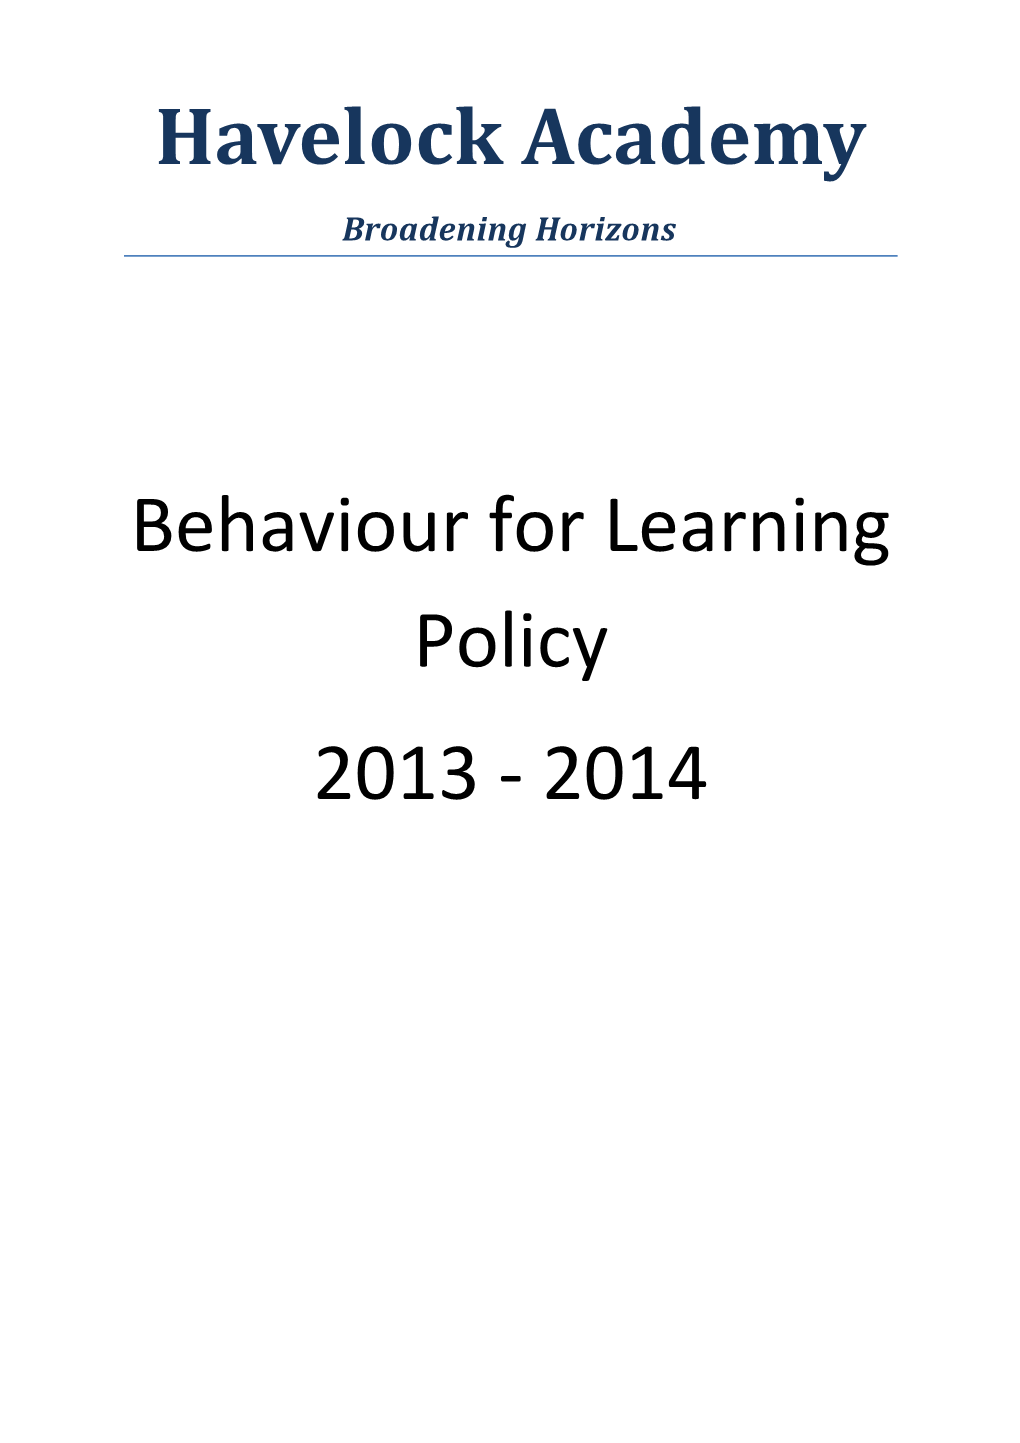 Behaviour for Learning Policy s1